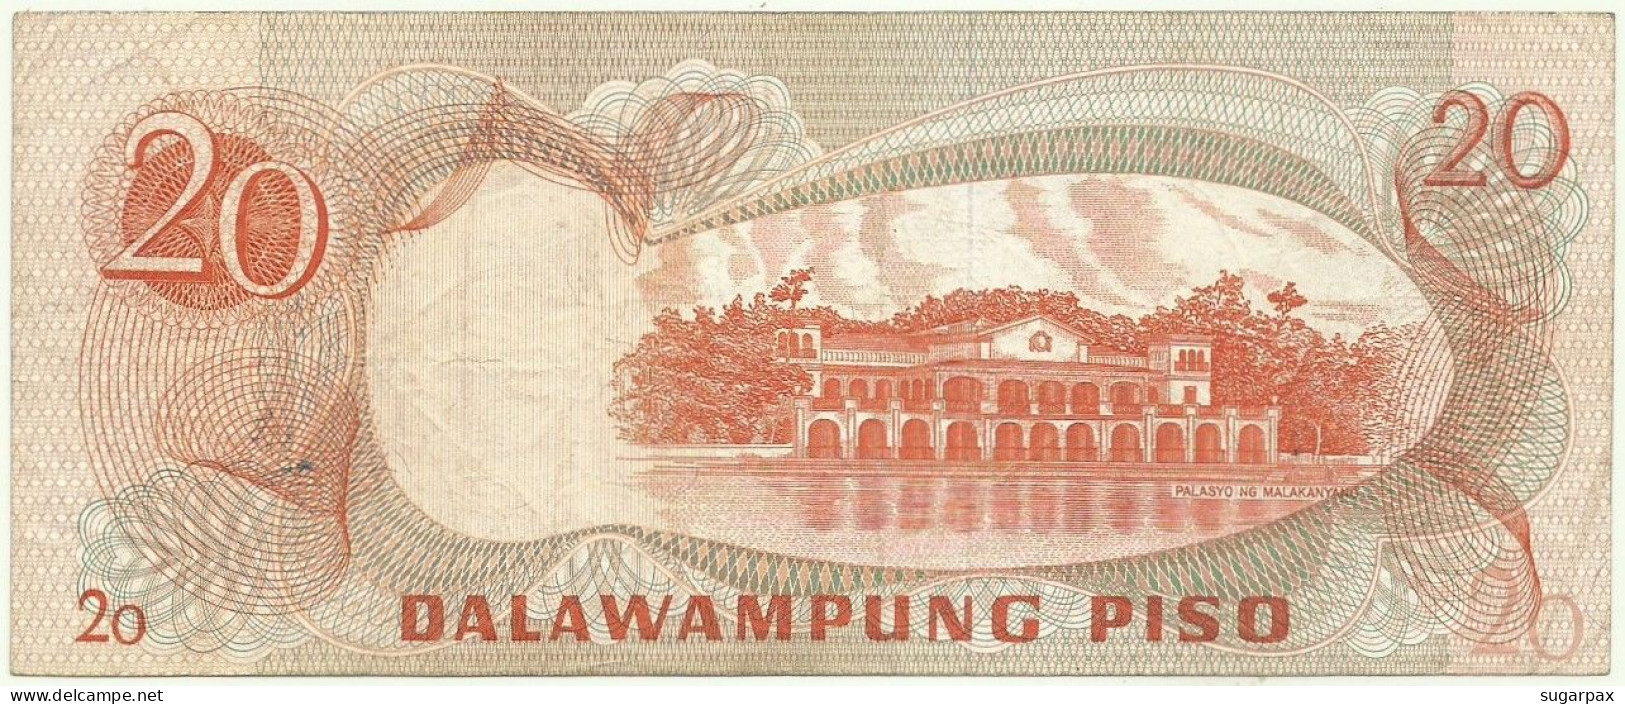 Philippines - 20 Piso - ND ( 1978 ) - Pick 162.a - Sign. 8 - Serie ML - ANG BAGONG LIPUNAN - Philippines